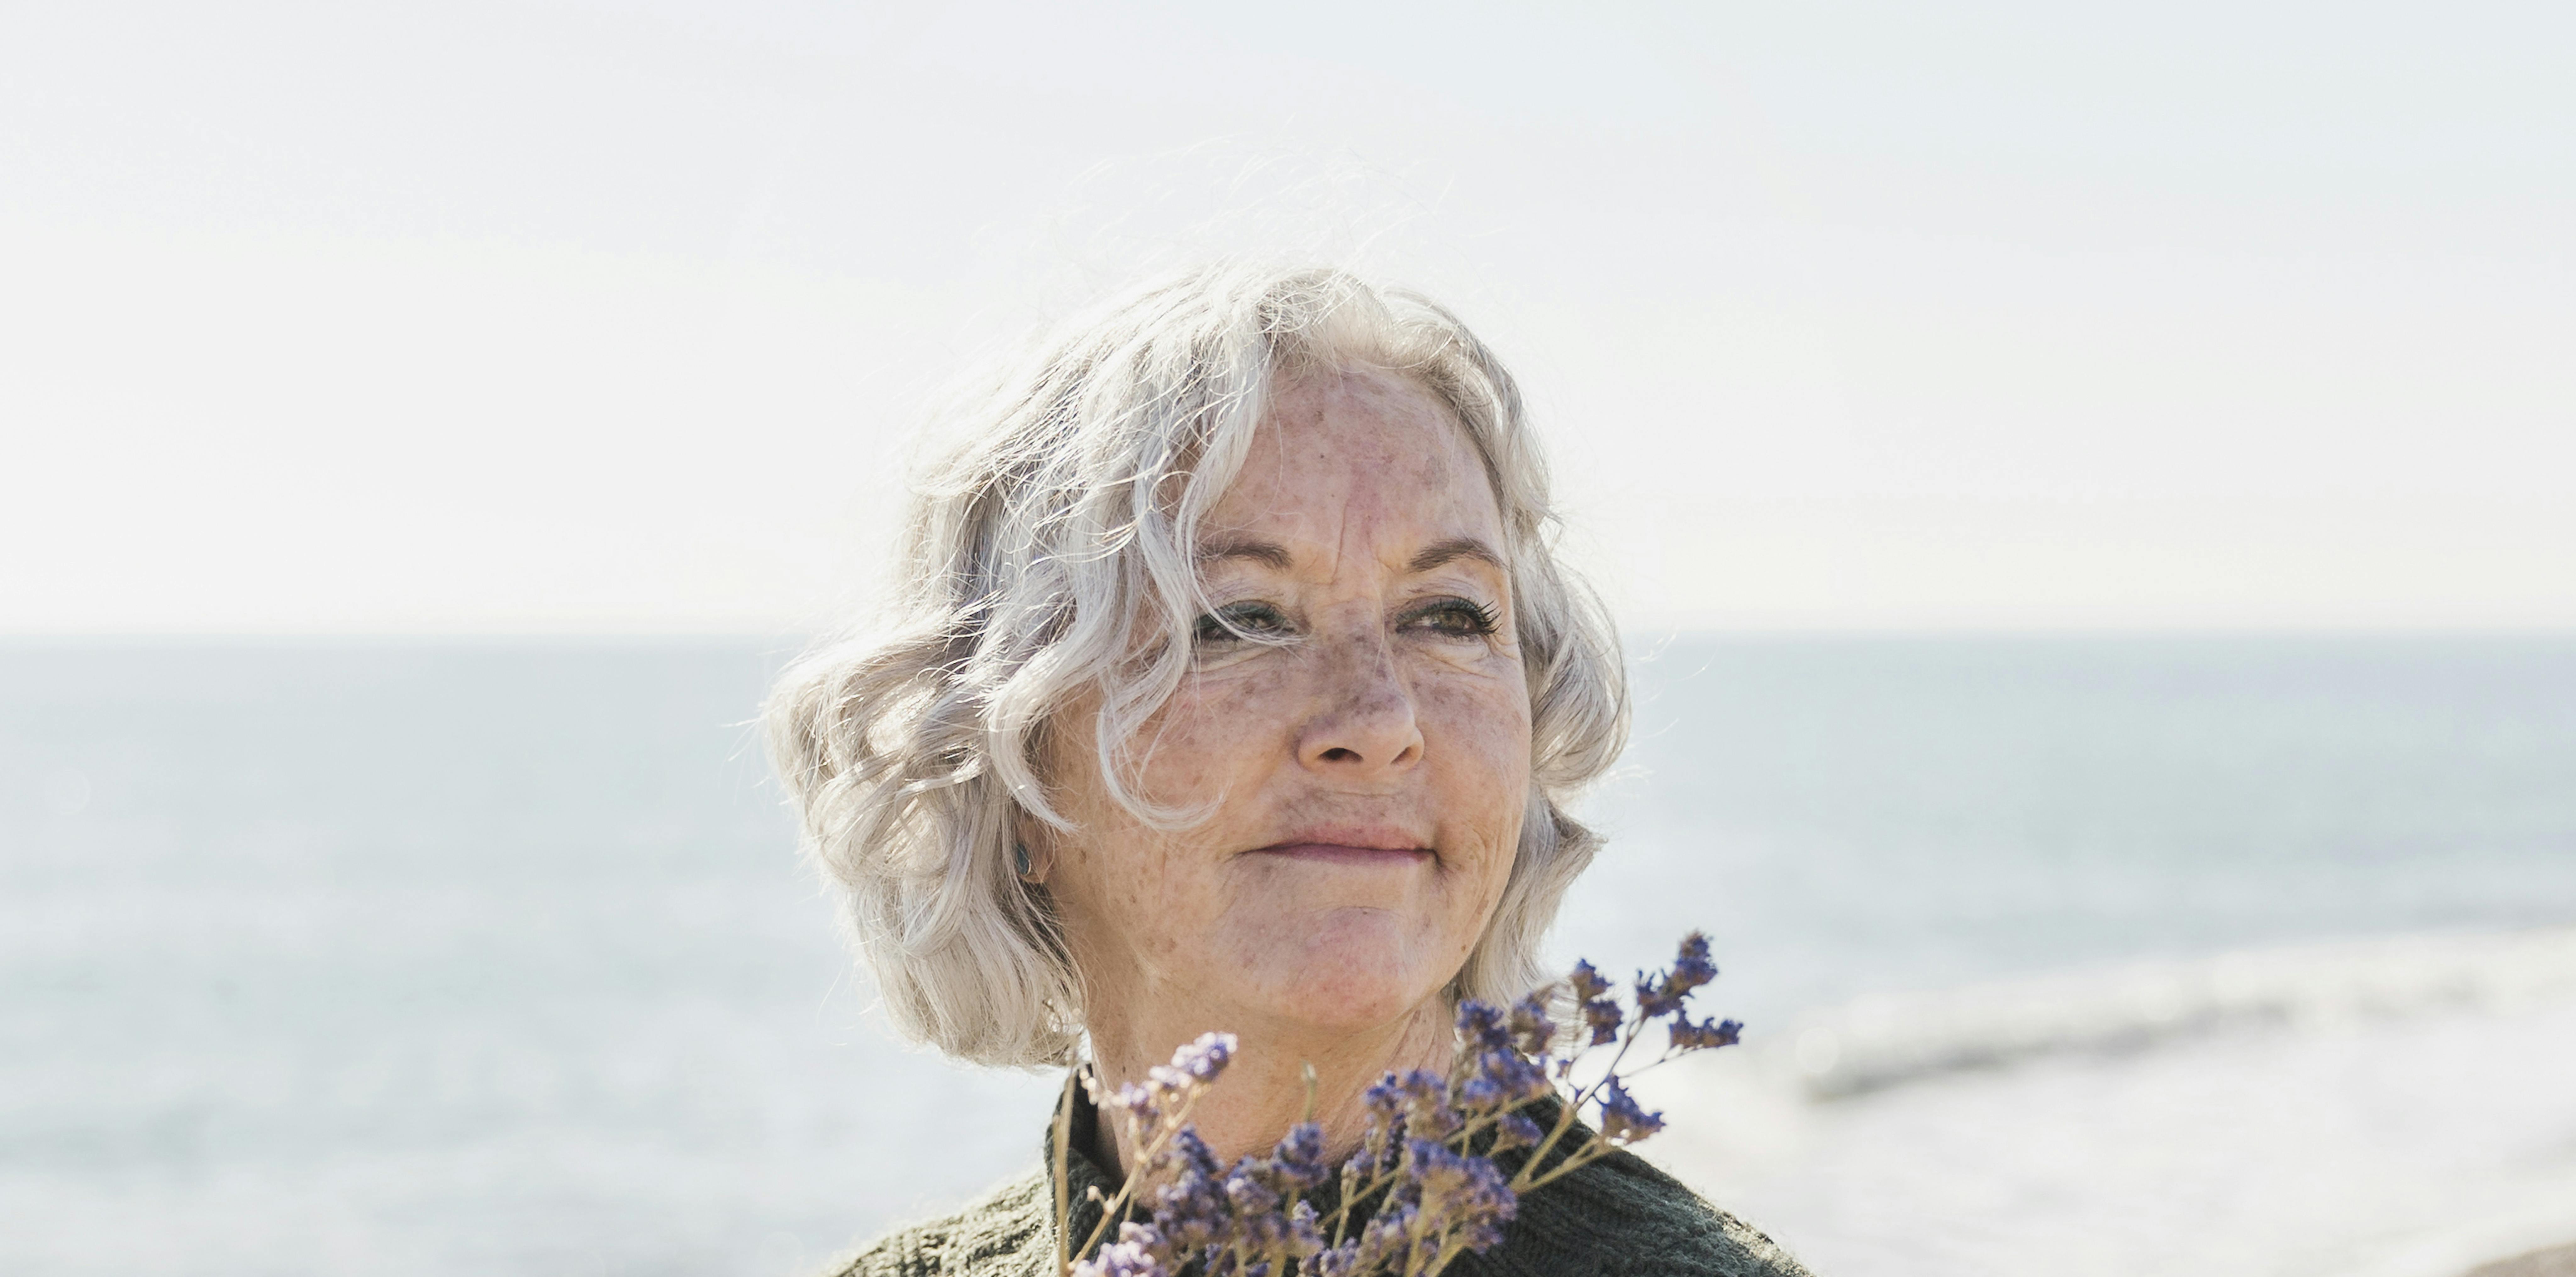 Woman holding a bouquet of dried flowers at the beach